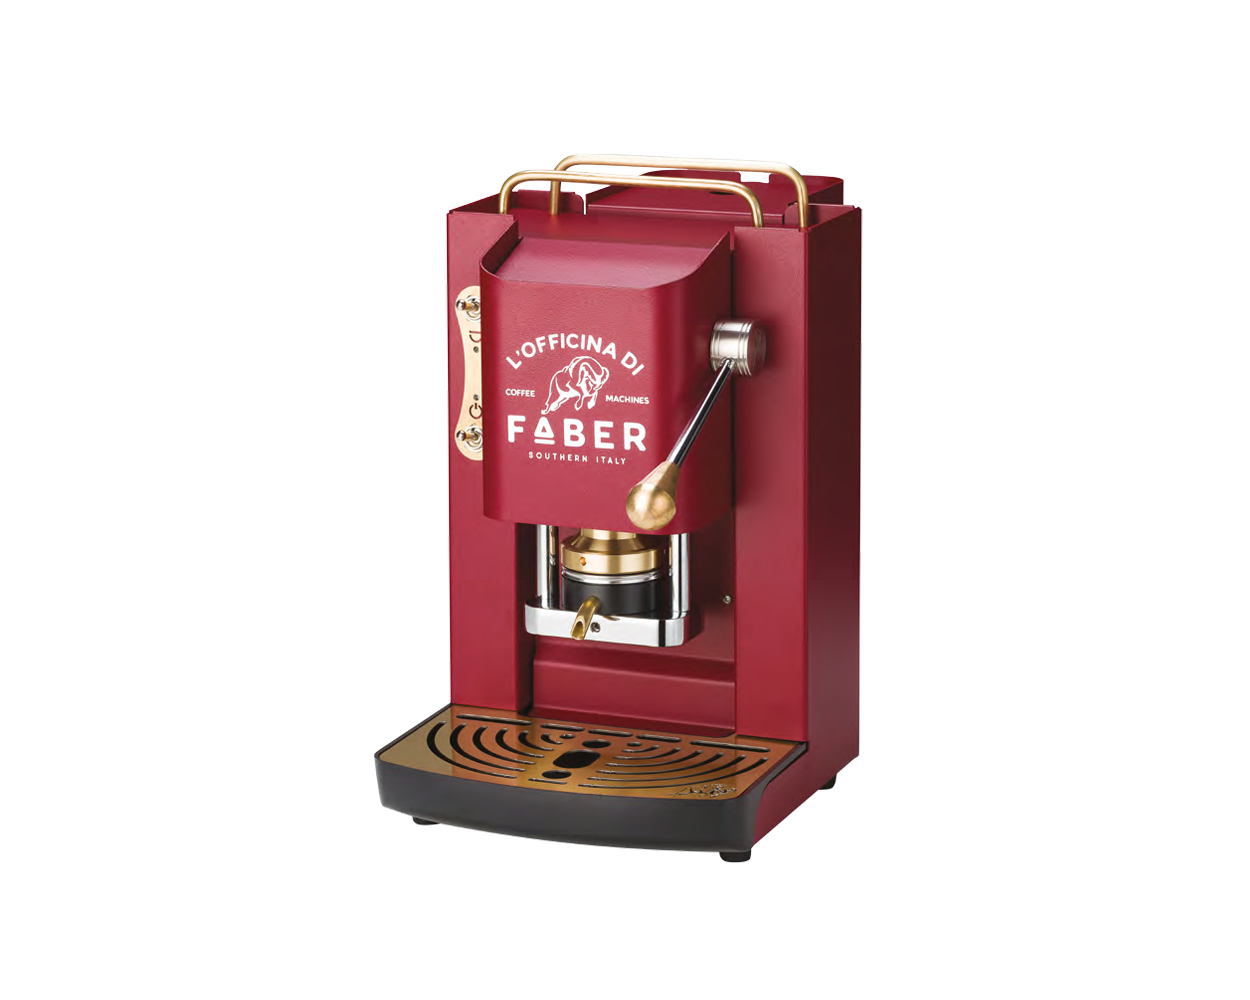 Officina di Faber Pro Deluxe Basic Kaffeemaschine Cherry Red